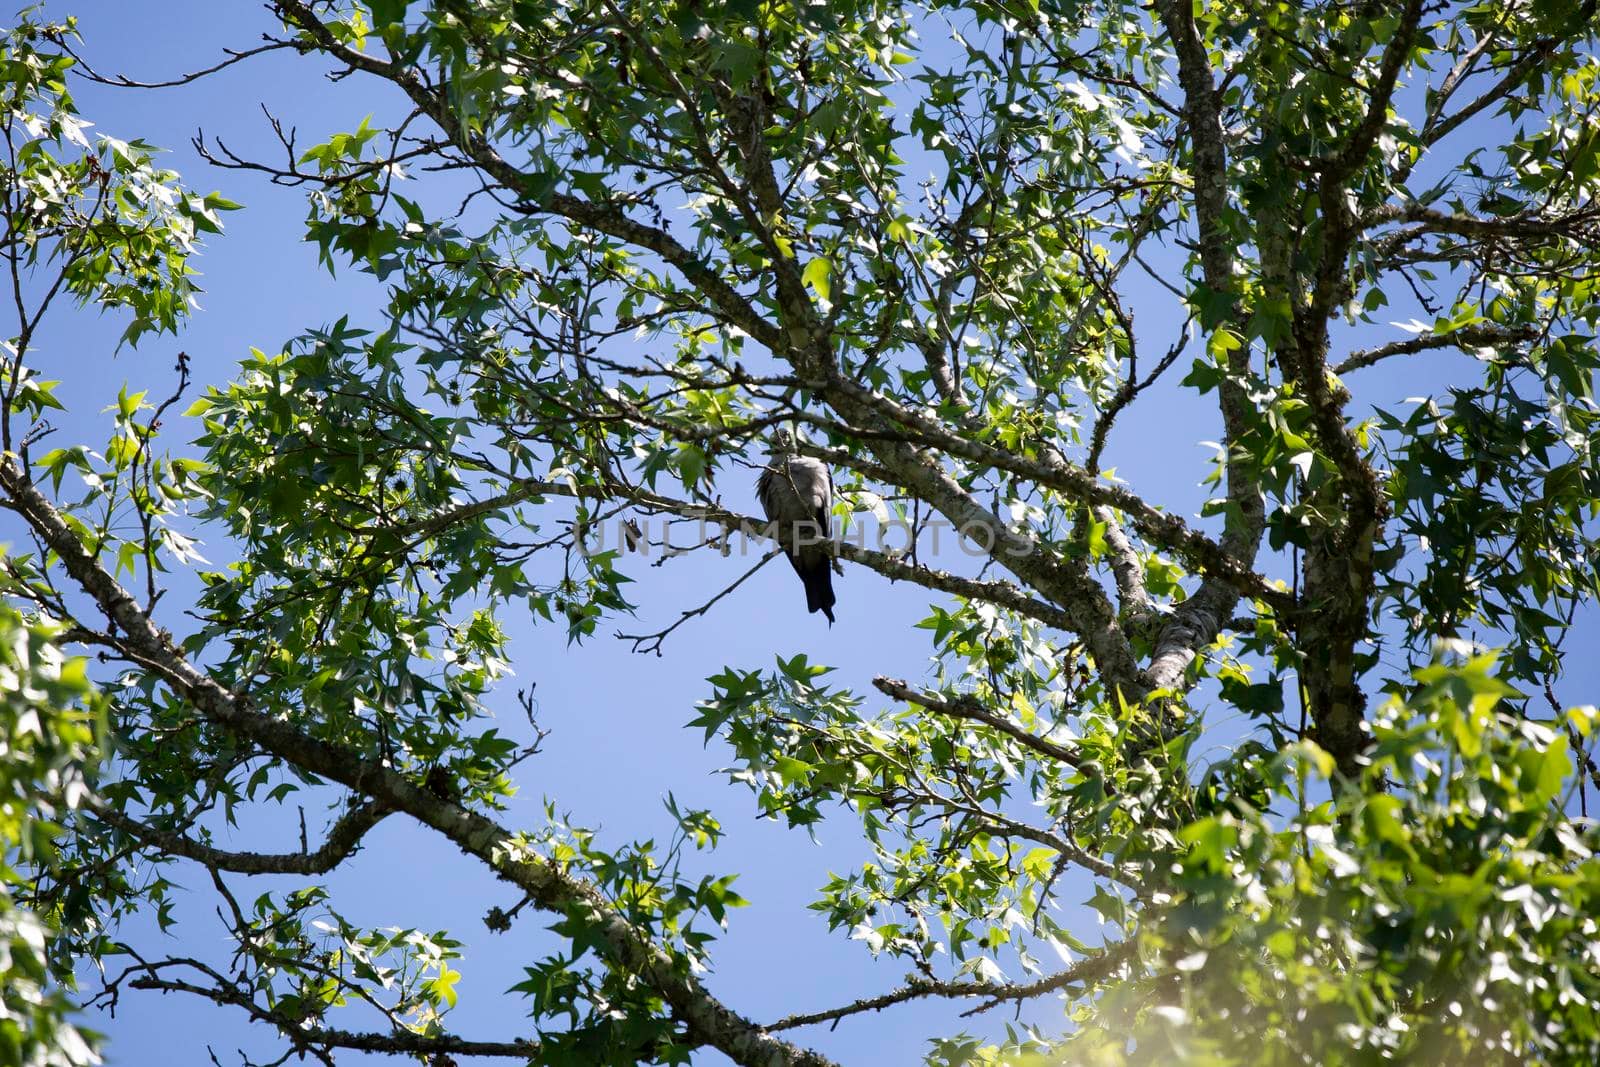 Mississippi kite (Ictinia mississippiensis) looking down curiously from a perch on a tree branch